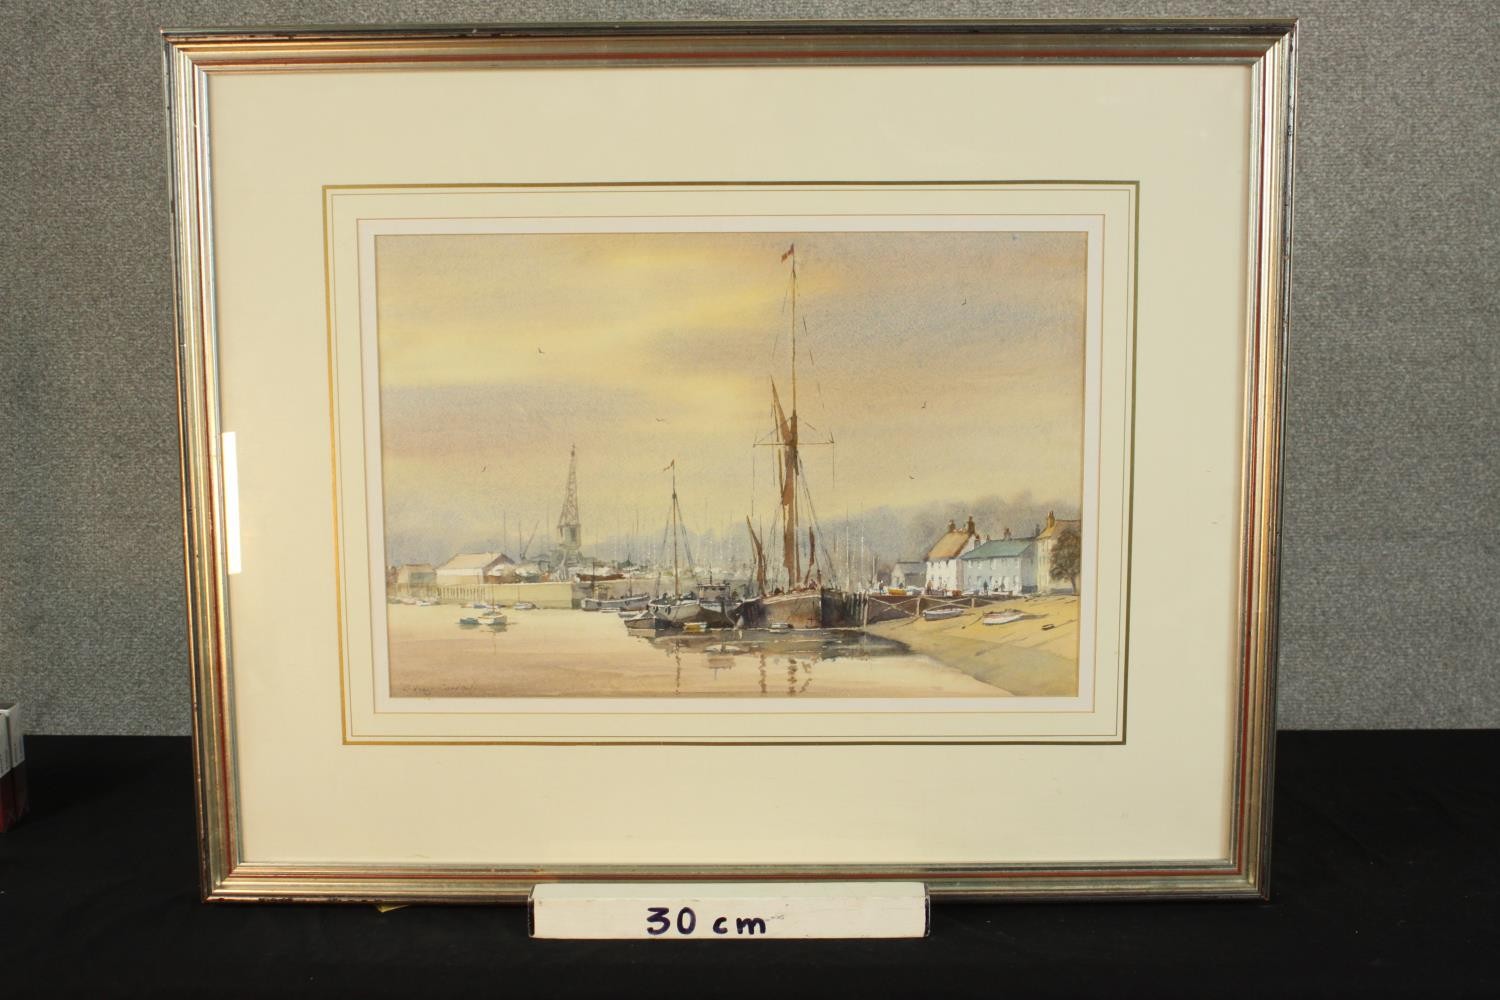 Sidney Cardew (1931 - ), Fishing Boats in the Harbour, watercolour on paper, signed and framed. H.69 - Image 2 of 6